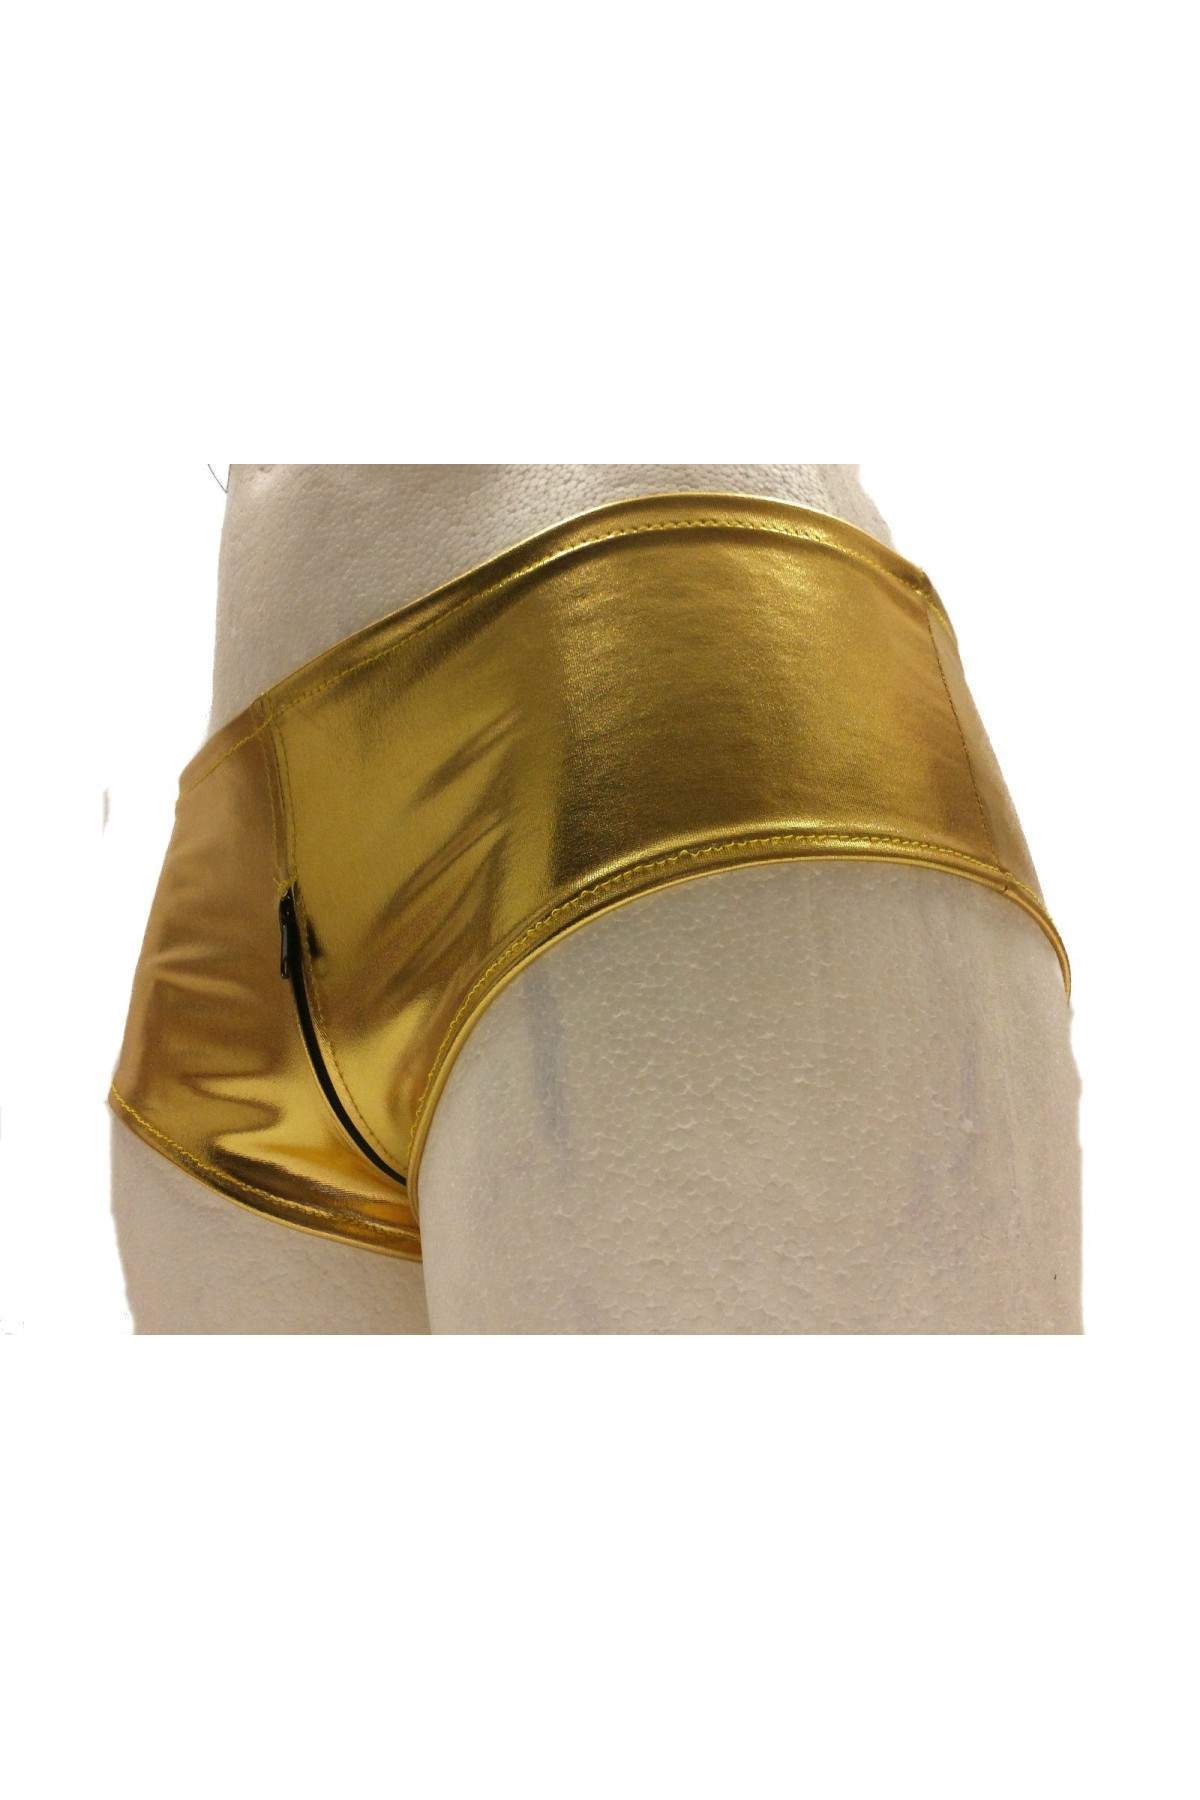 f.girth Gold Hotpants Ouvert with Zipper 15,00 € - 